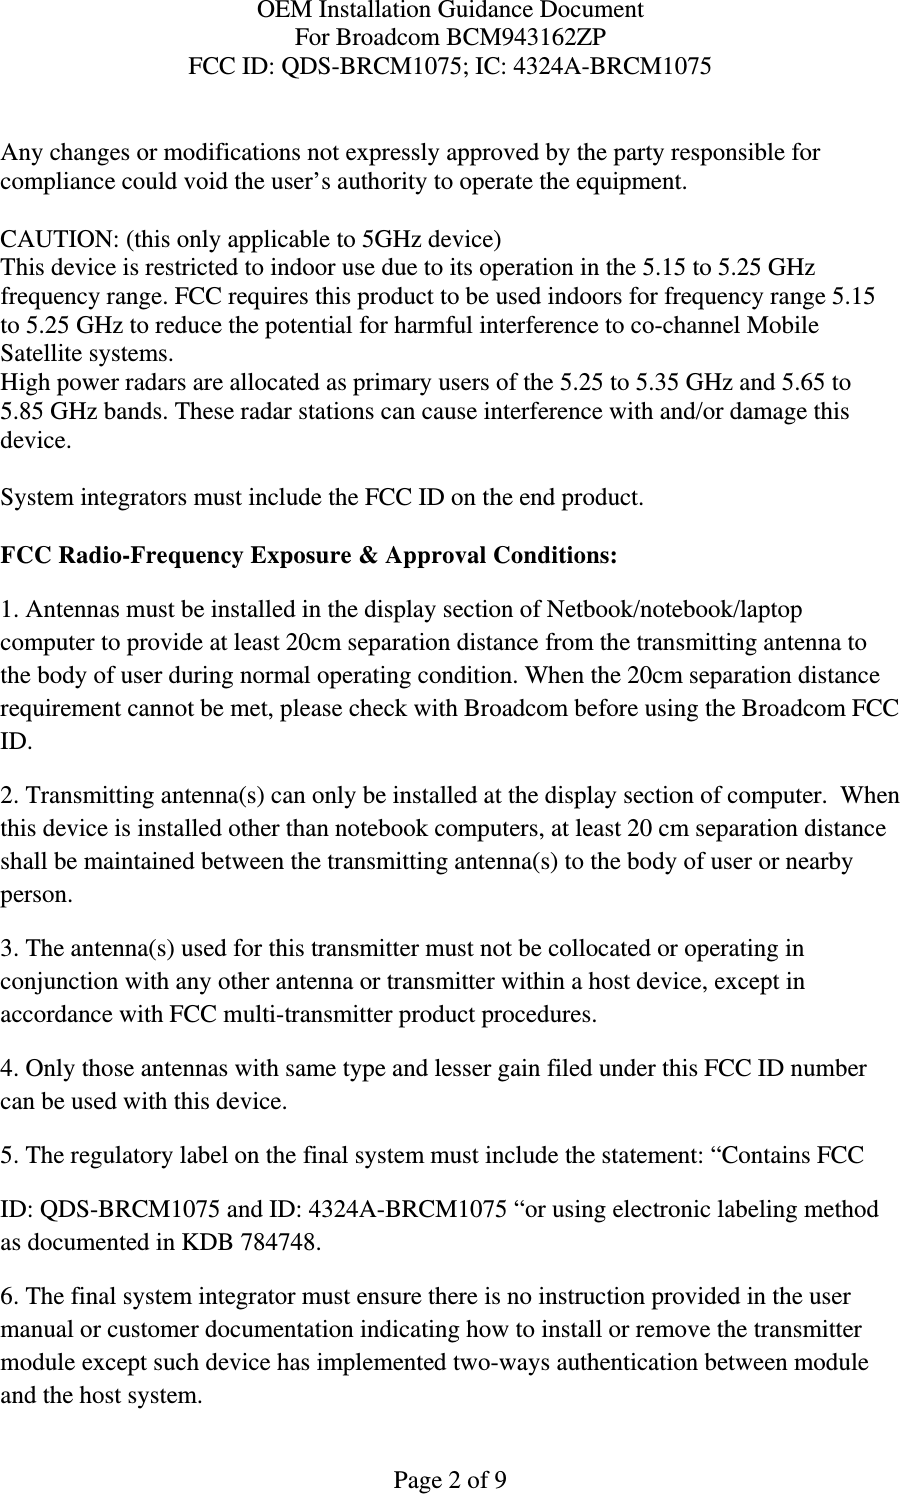 OEM Installation Guidance Document For Broadcom BCM943162ZP FCC ID: QDS-BRCM1075; IC: 4324A-BRCM1075  Page 2 of 9  Any changes or modifications not expressly approved by the party responsible for compliance could void the user’s authority to operate the equipment.  CAUTION: (this only applicable to 5GHz device) This device is restricted to indoor use due to its operation in the 5.15 to 5.25 GHz frequency range. FCC requires this product to be used indoors for frequency range 5.15 to 5.25 GHz to reduce the potential for harmful interference to co-channel Mobile Satellite systems. High power radars are allocated as primary users of the 5.25 to 5.35 GHz and 5.65 to 5.85 GHz bands. These radar stations can cause interference with and/or damage this device.  System integrators must include the FCC ID on the end product.   FCC Radio-Frequency Exposure &amp; Approval Conditions: 1. Antennas must be installed in the display section of Netbook/notebook/laptop computer to provide at least 20cm separation distance from the transmitting antenna to the body of user during normal operating condition. When the 20cm separation distance requirement cannot be met, please check with Broadcom before using the Broadcom FCC ID.  2. Transmitting antenna(s) can only be installed at the display section of computer.  When this device is installed other than notebook computers, at least 20 cm separation distance shall be maintained between the transmitting antenna(s) to the body of user or nearby person. 3. The antenna(s) used for this transmitter must not be collocated or operating in conjunction with any other antenna or transmitter within a host device, except in accordance with FCC multi-transmitter product procedures. 4. Only those antennas with same type and lesser gain filed under this FCC ID number can be used with this device. 5. The regulatory label on the final system must include the statement: “Contains FCC ID: QDS-BRCM1075 and ID: 4324A-BRCM1075 “or using electronic labeling method as documented in KDB 784748. 6. The final system integrator must ensure there is no instruction provided in the user manual or customer documentation indicating how to install or remove the transmitter module except such device has implemented two-ways authentication between module and the host system. 